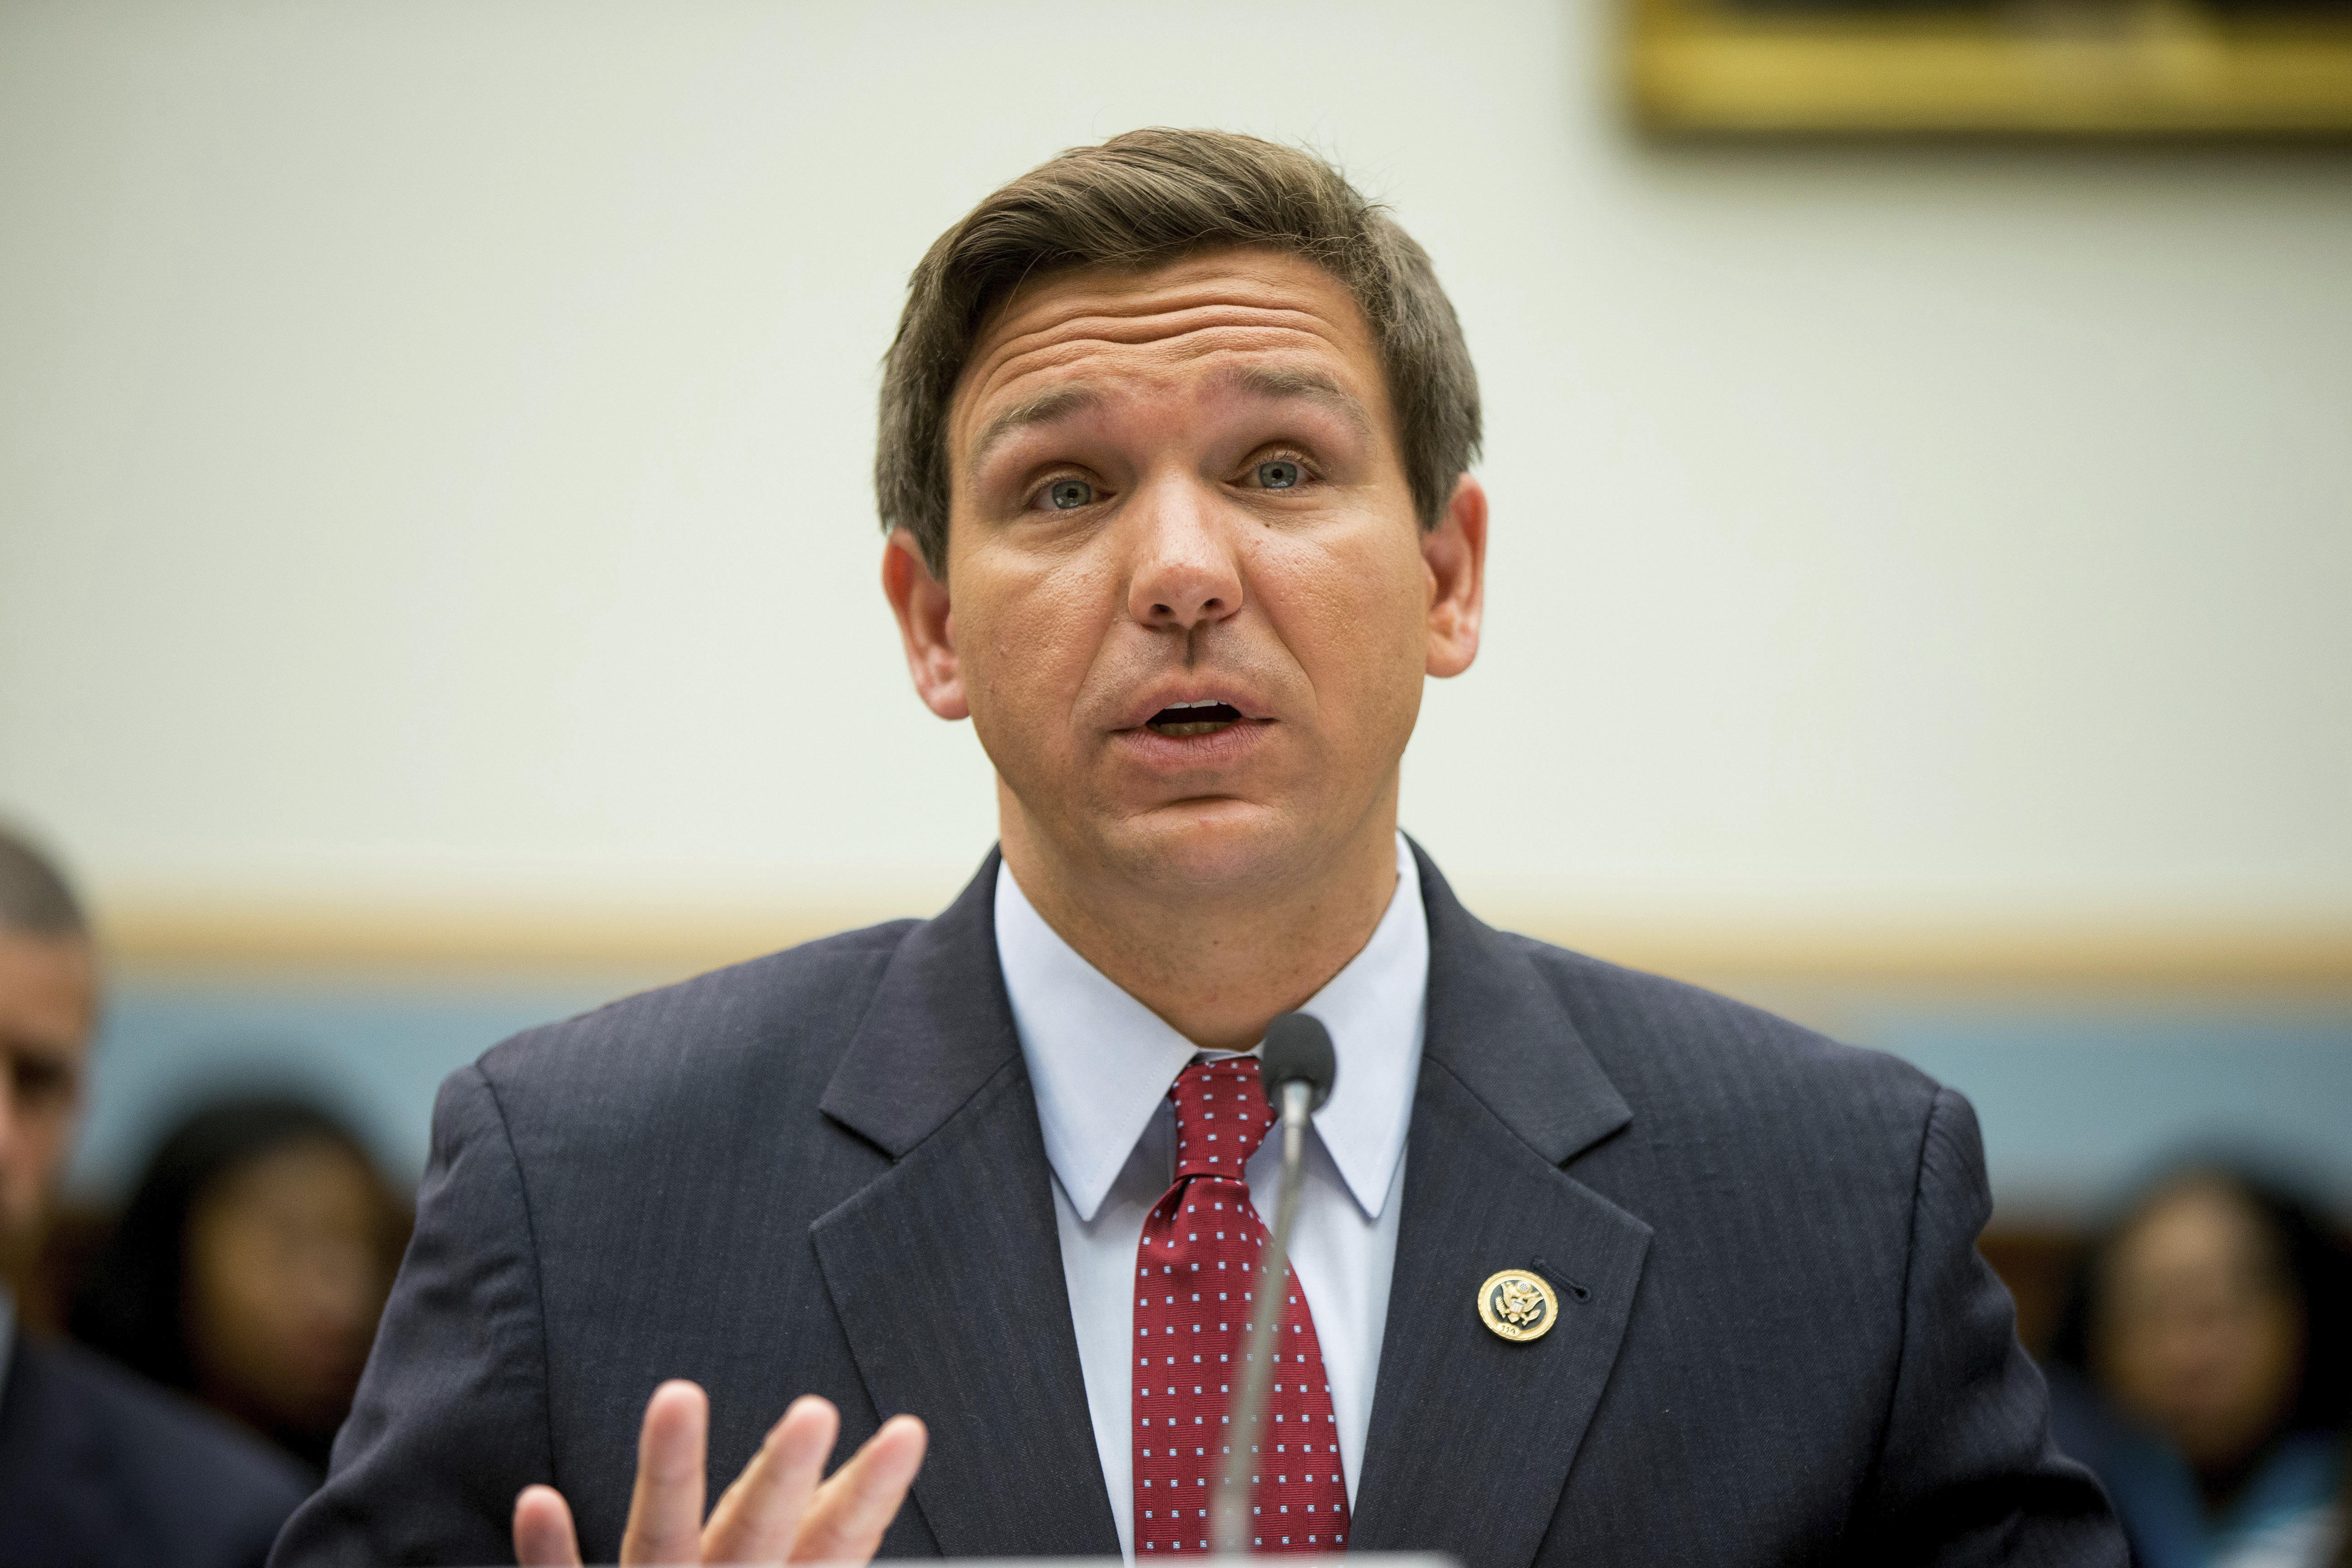 What to know about Rep. Ron DeSantis, Florida gubernatorial candidate